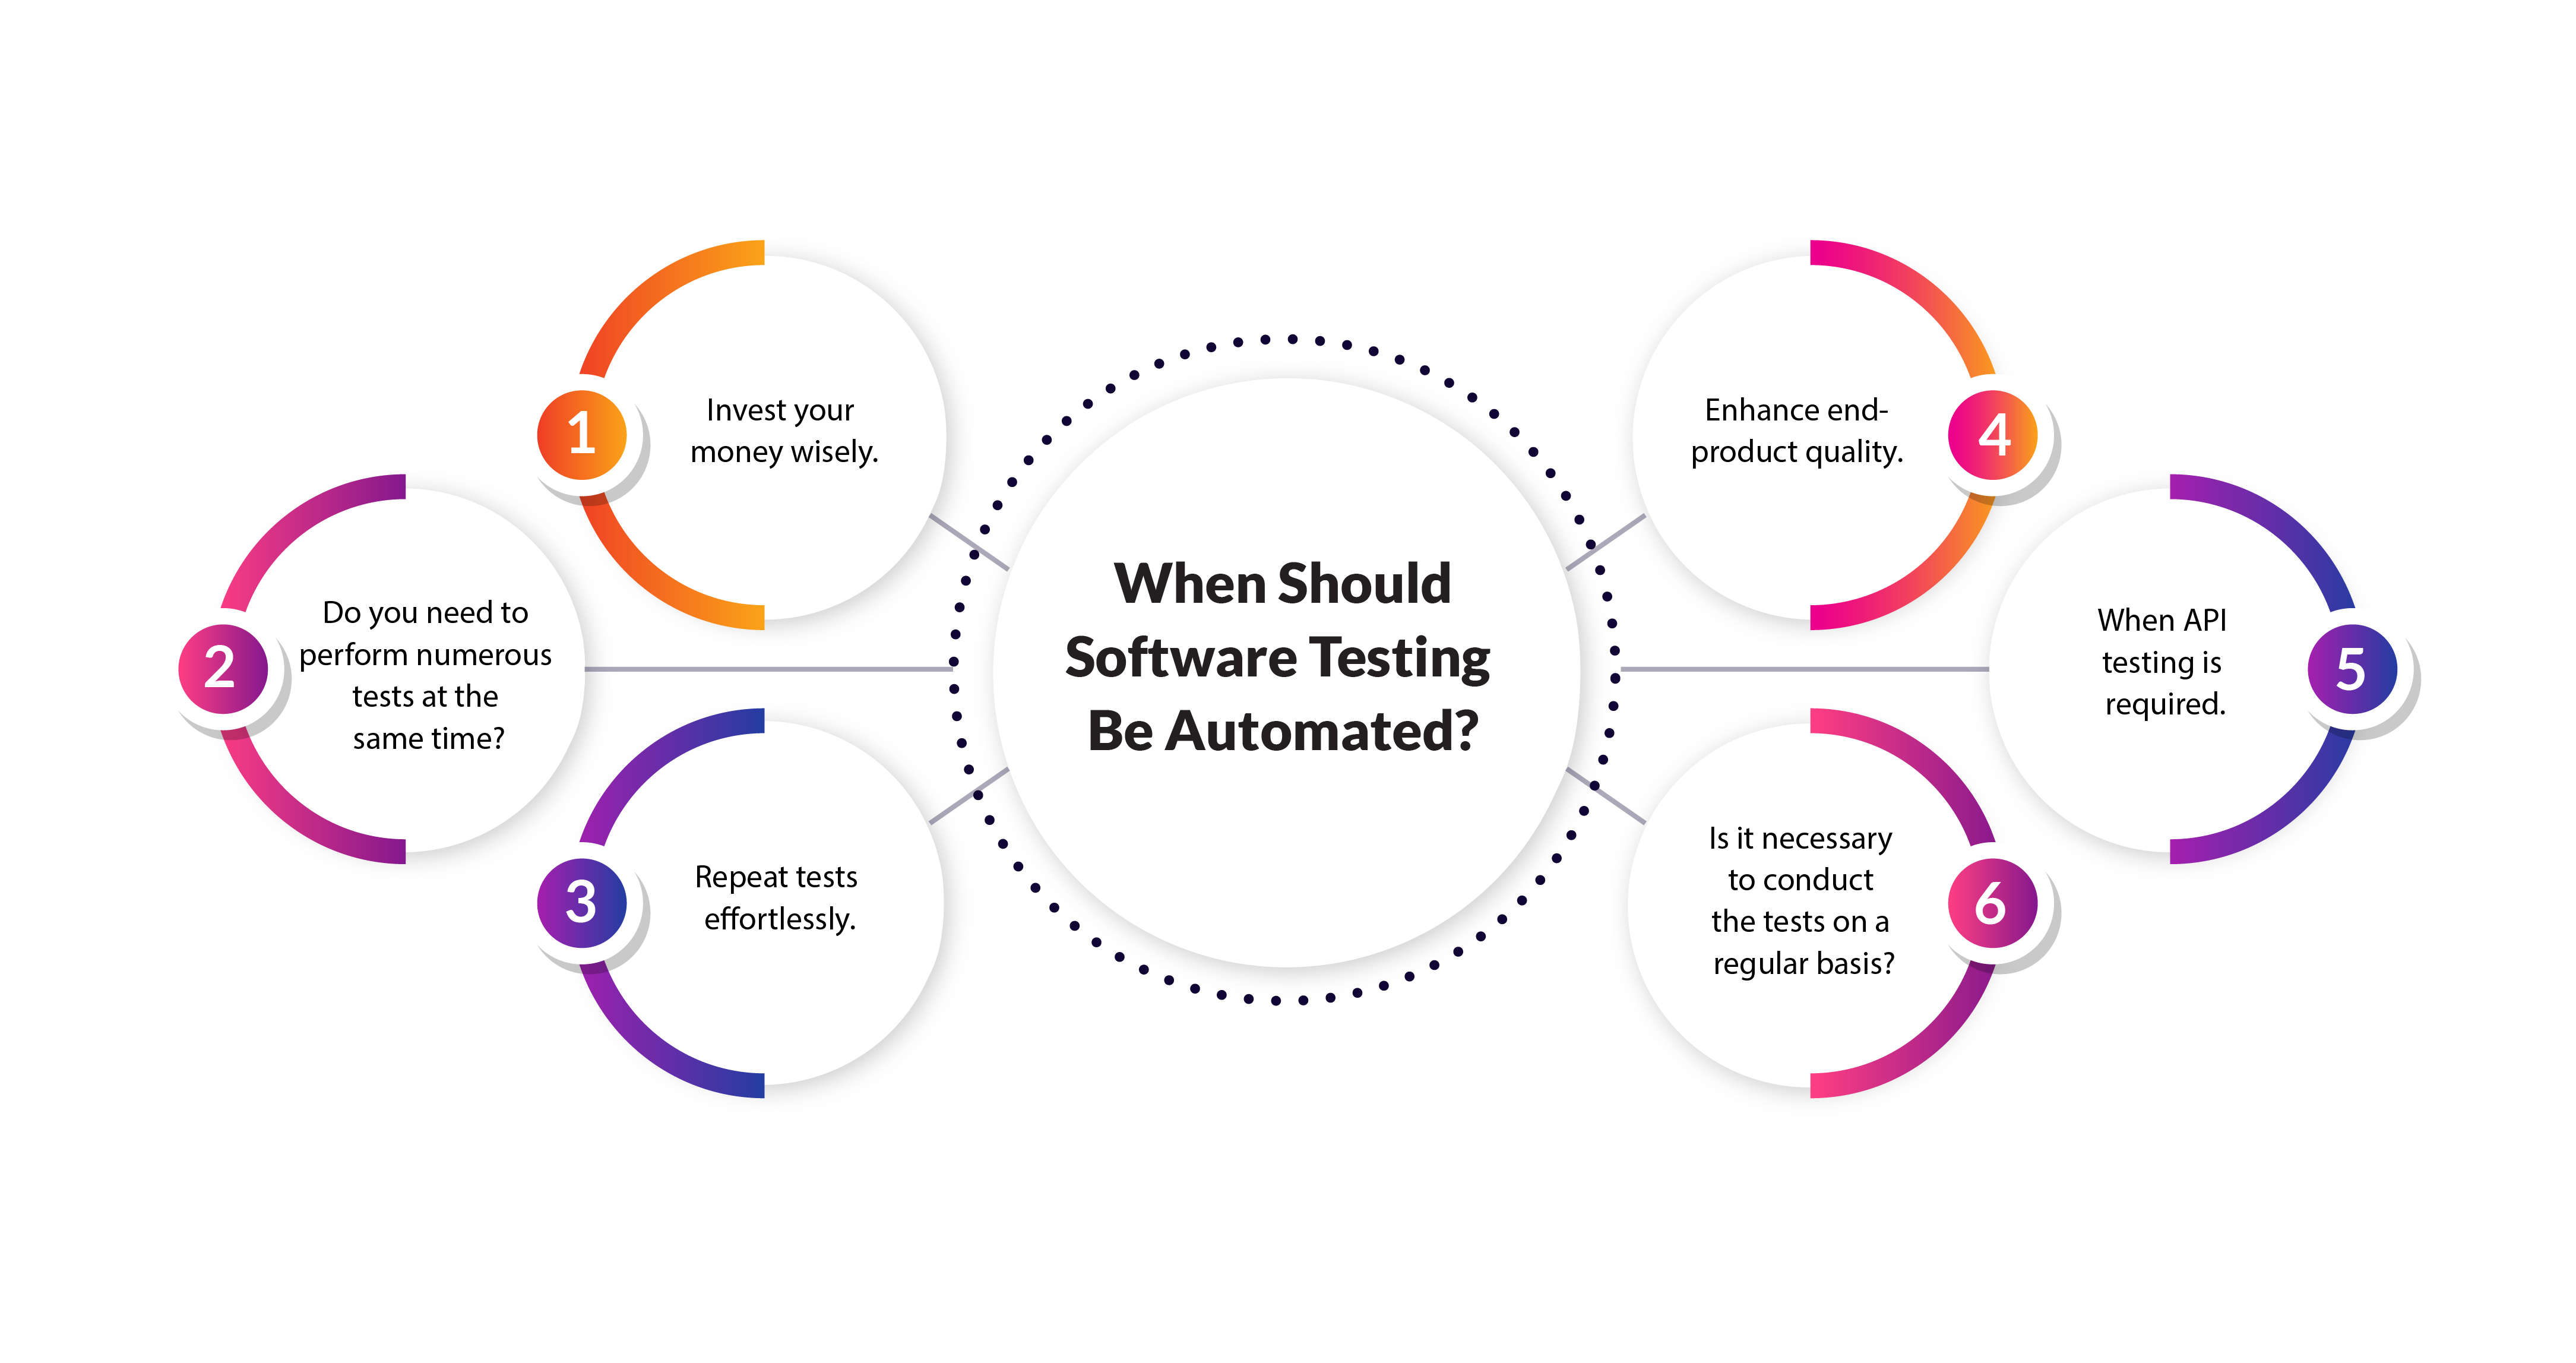 When Should Software Testing Be Automated